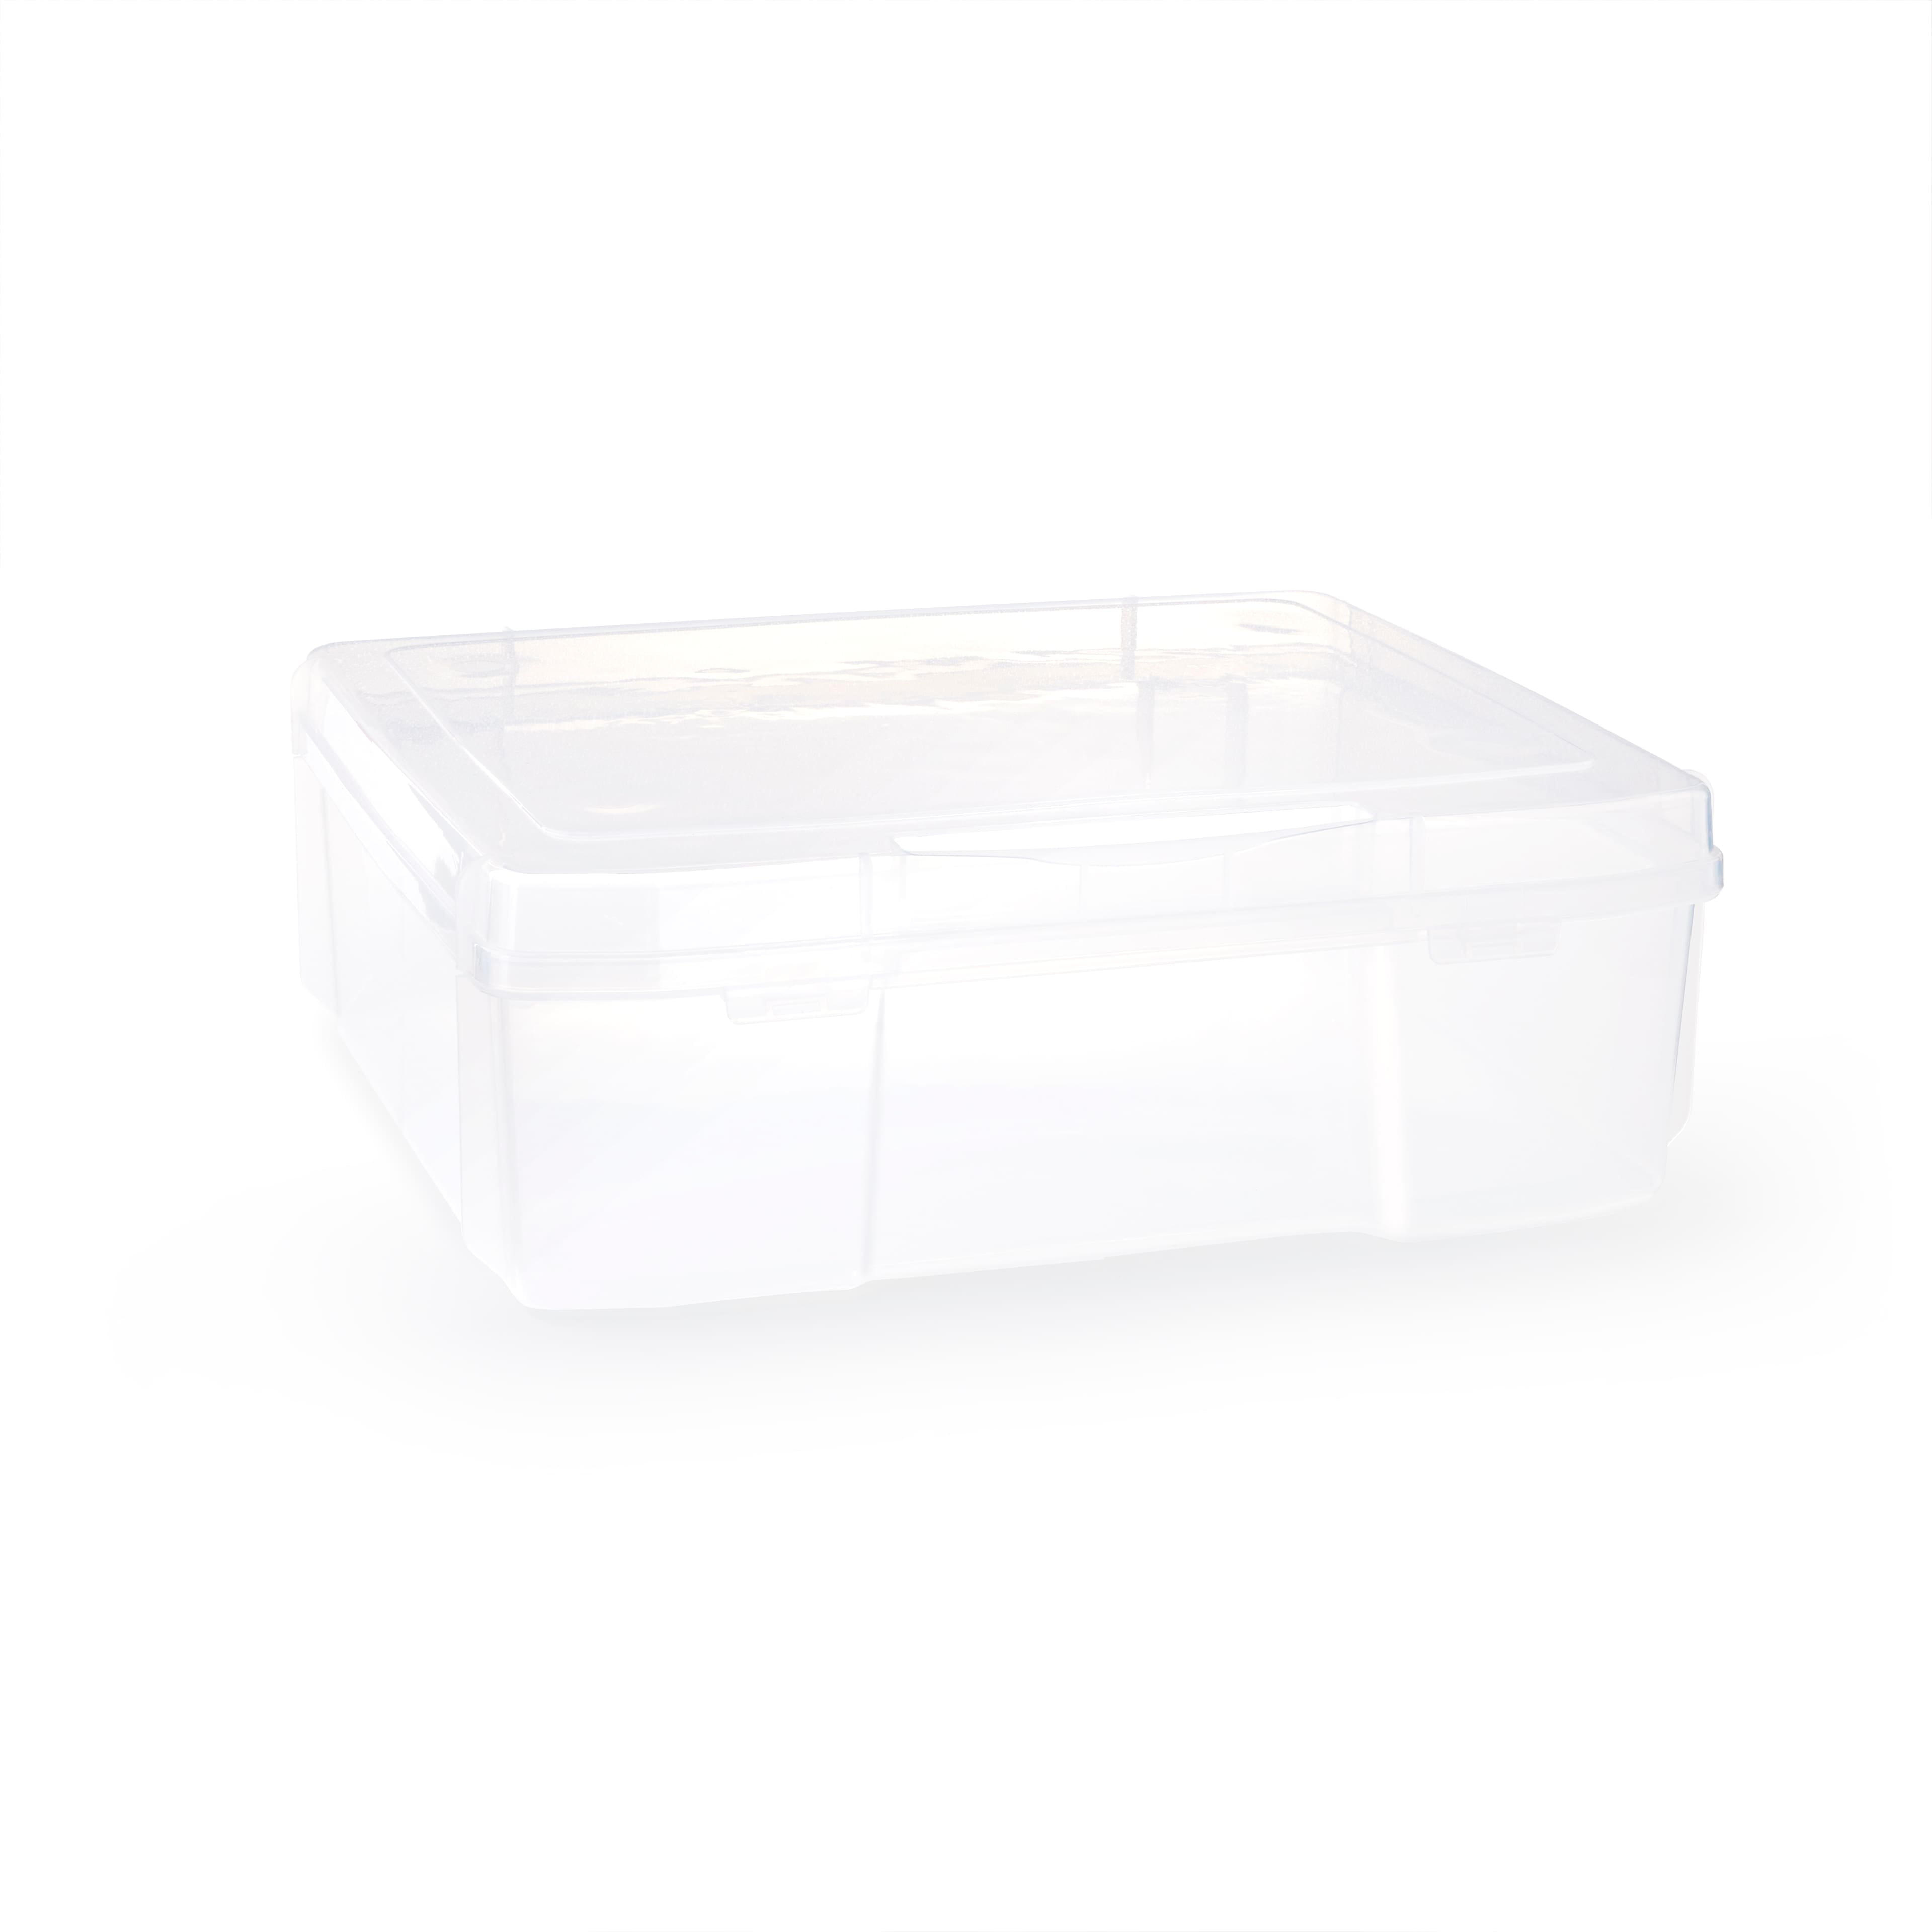 12 x 12 Storage Craft Case by Simply Tidy - Portable Case for